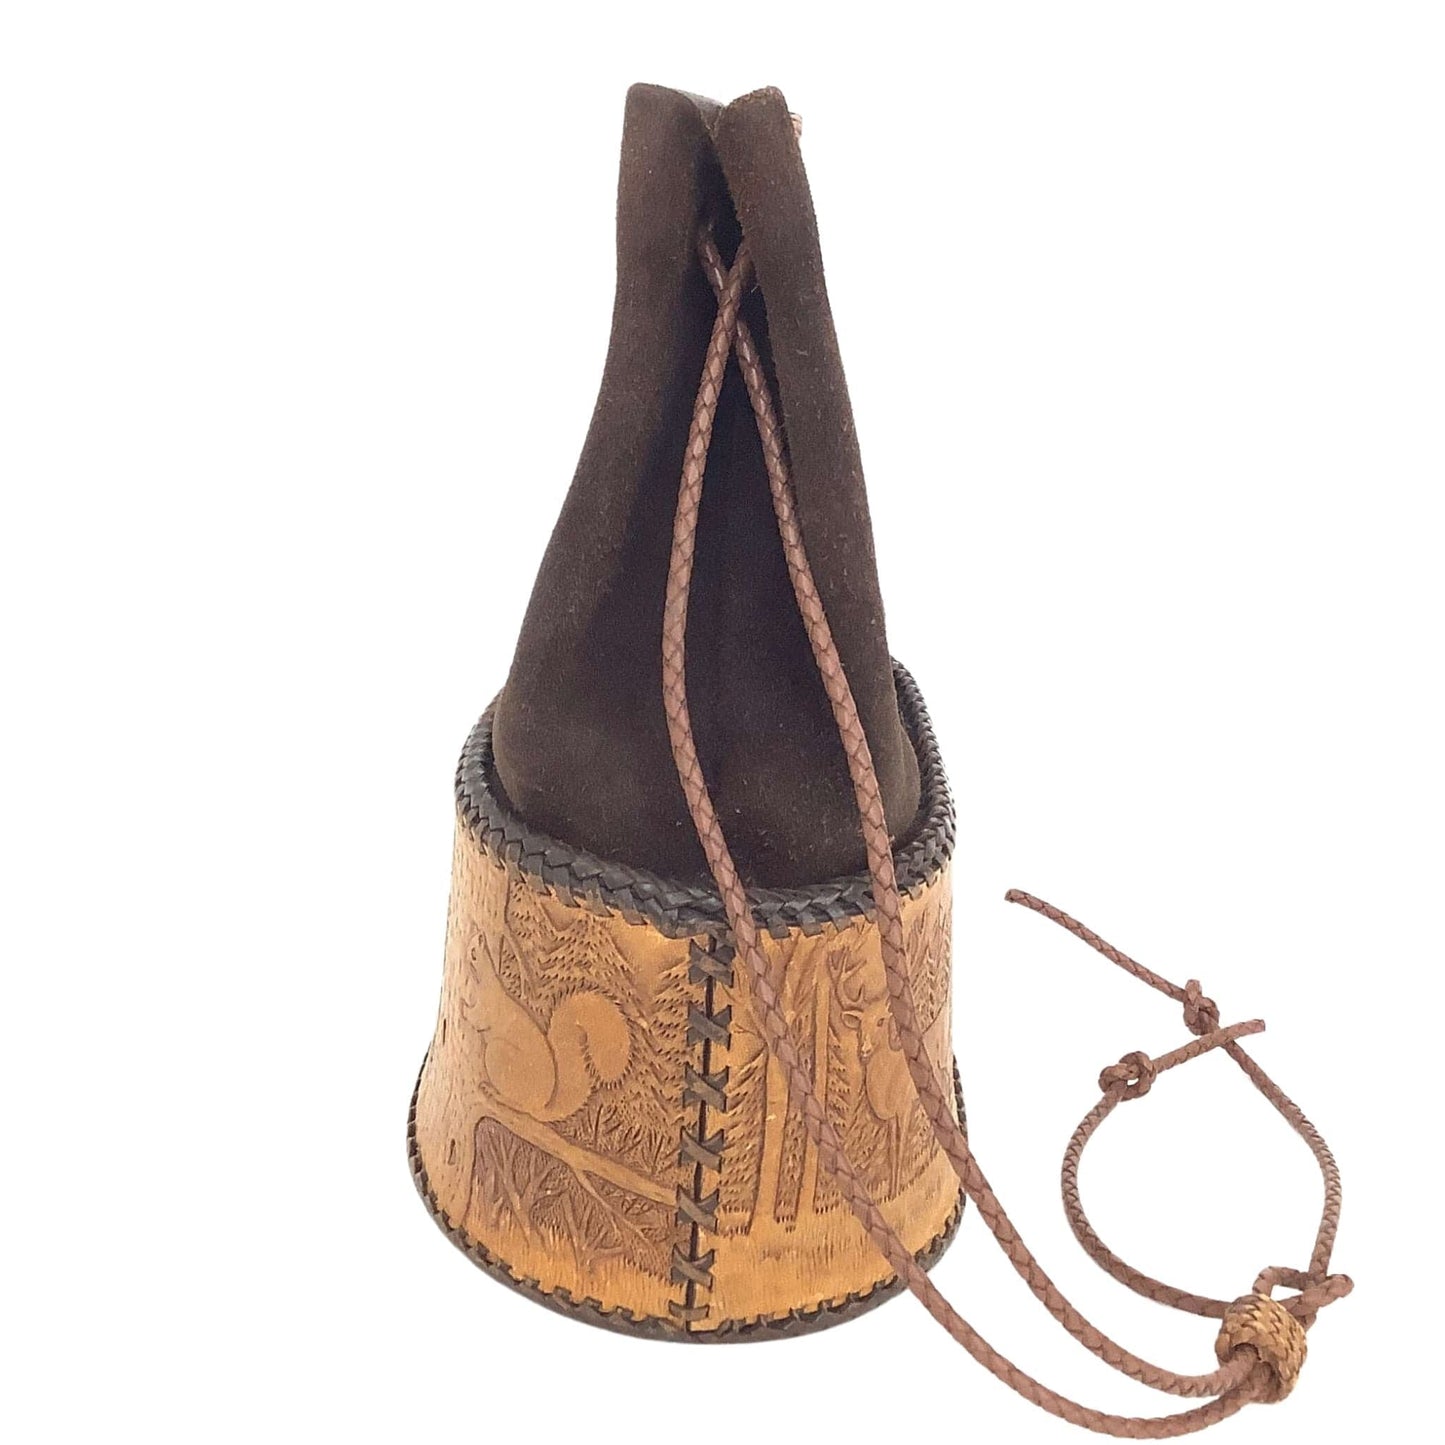 Antique Forest Theme Bag Brown / Leather / Vintage 1920s